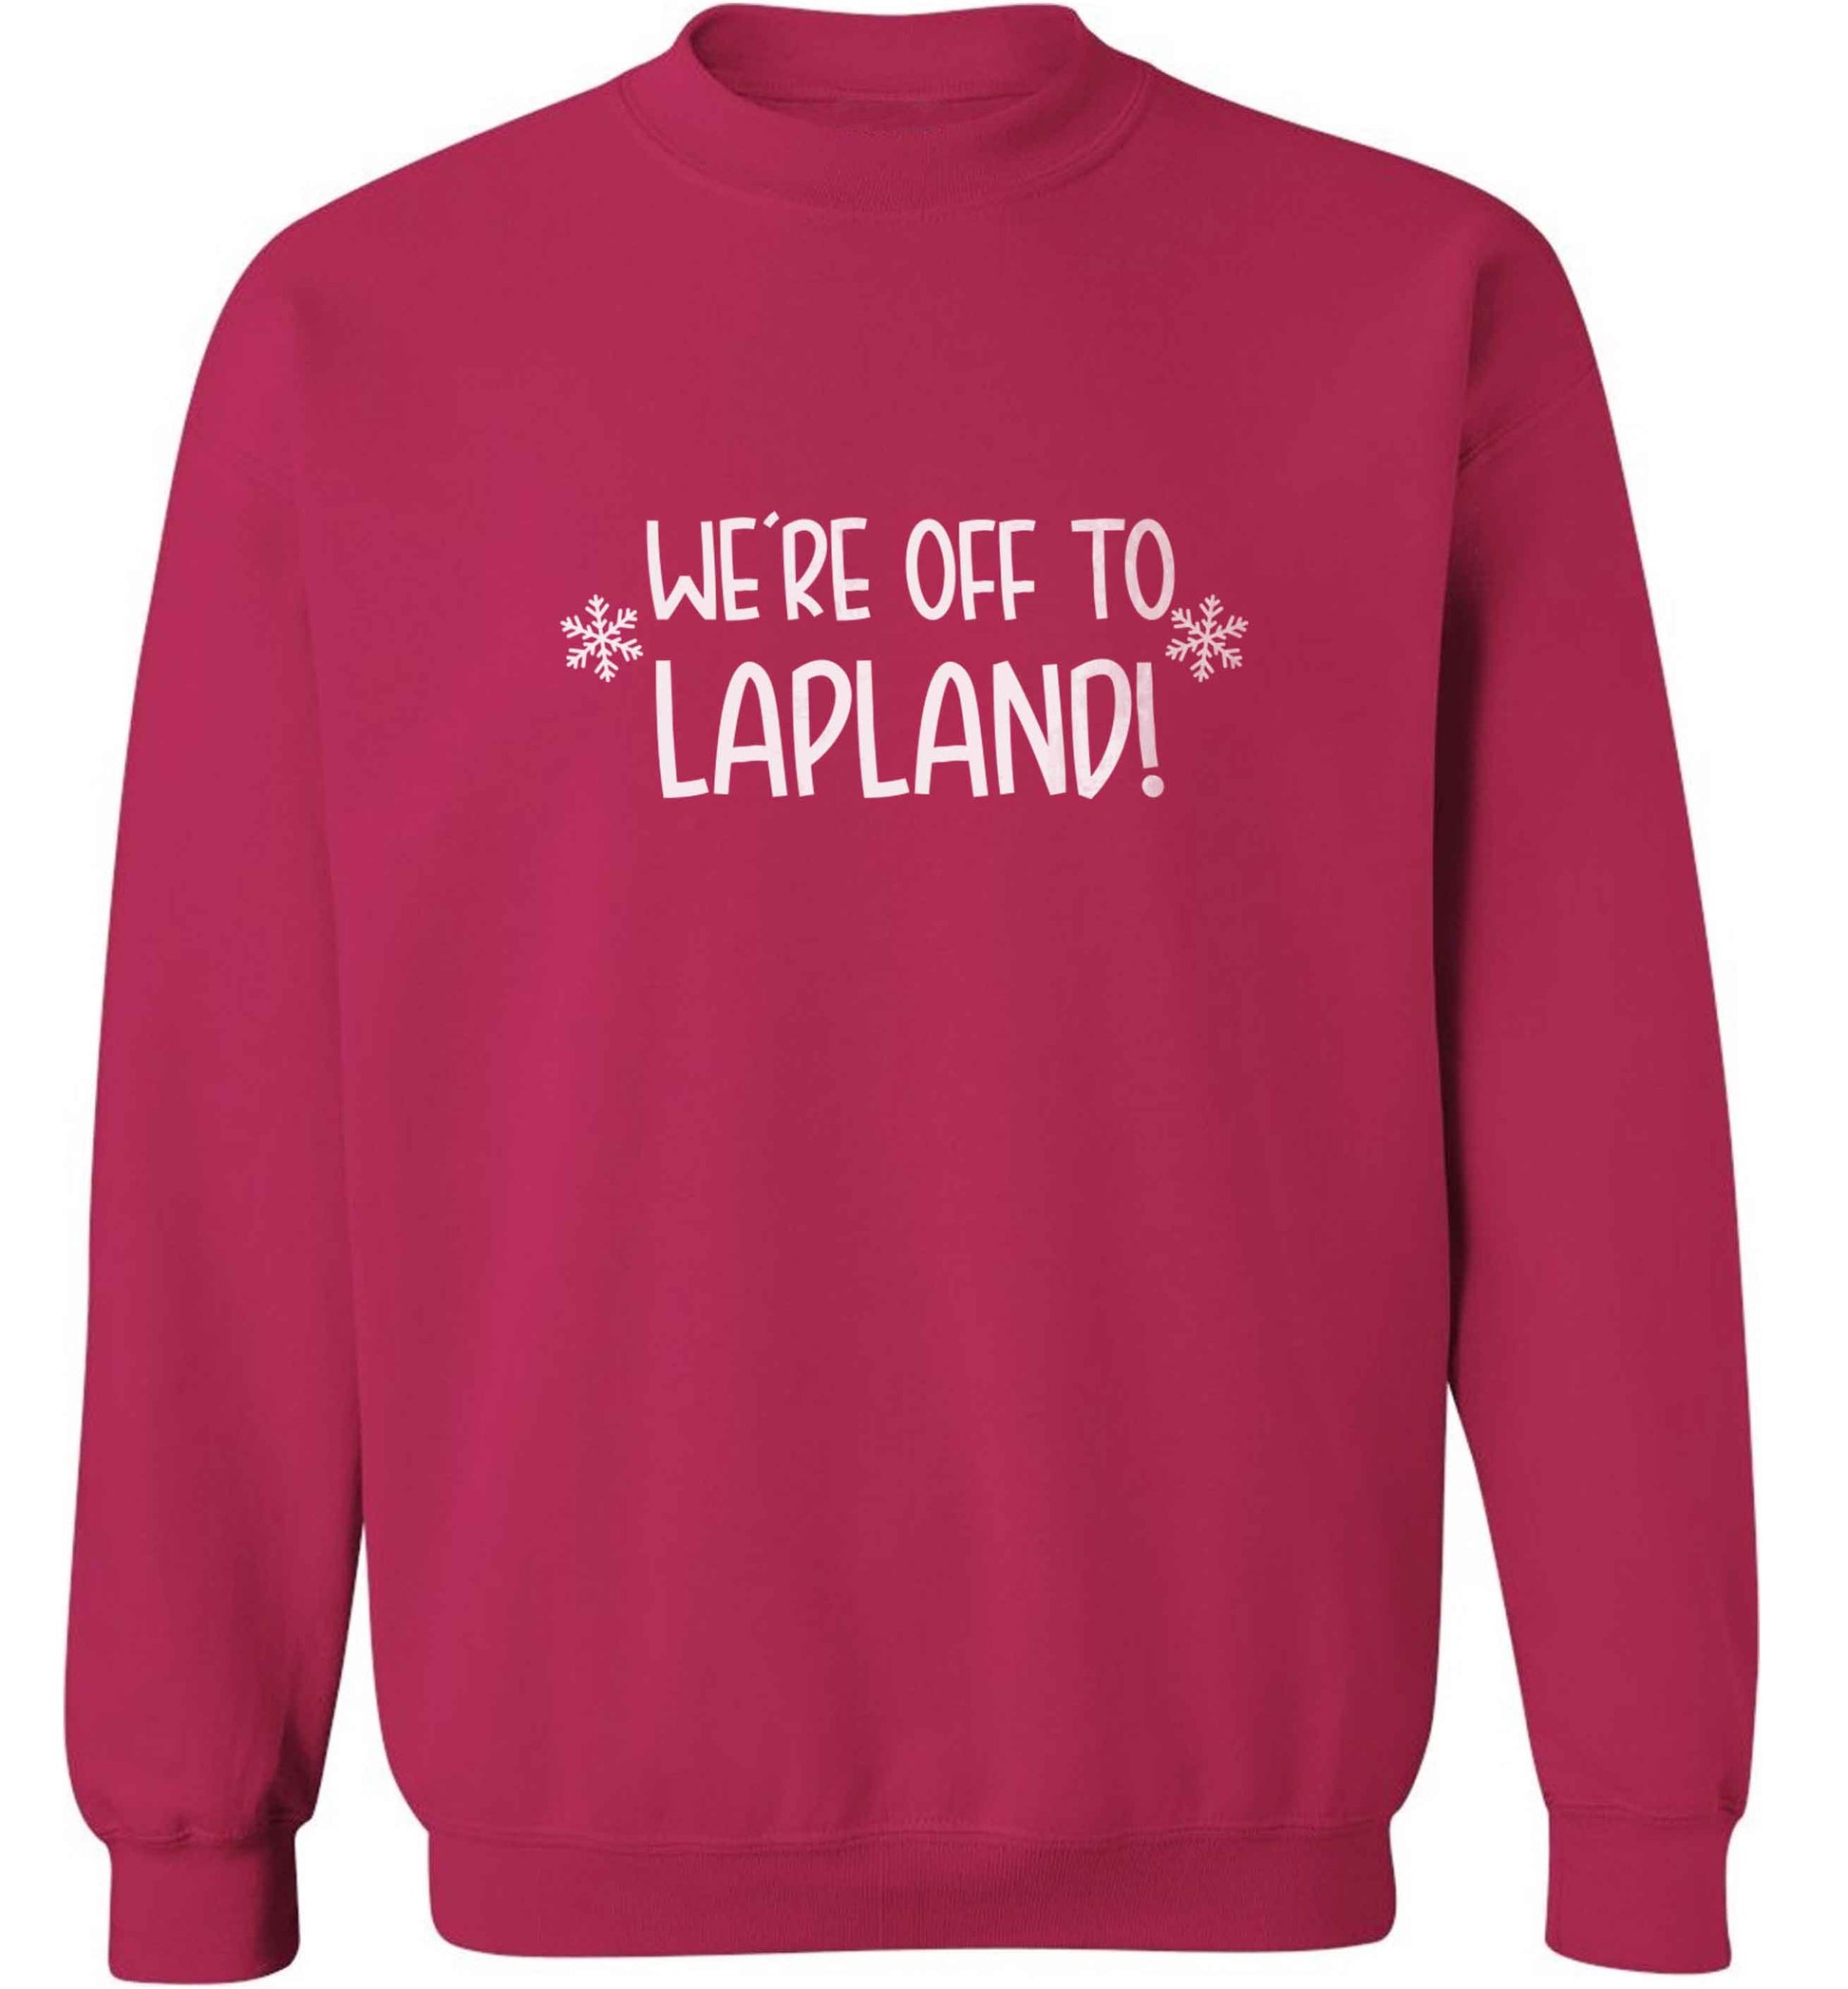 We're off to Lapland adult's unisex pink sweater 2XL